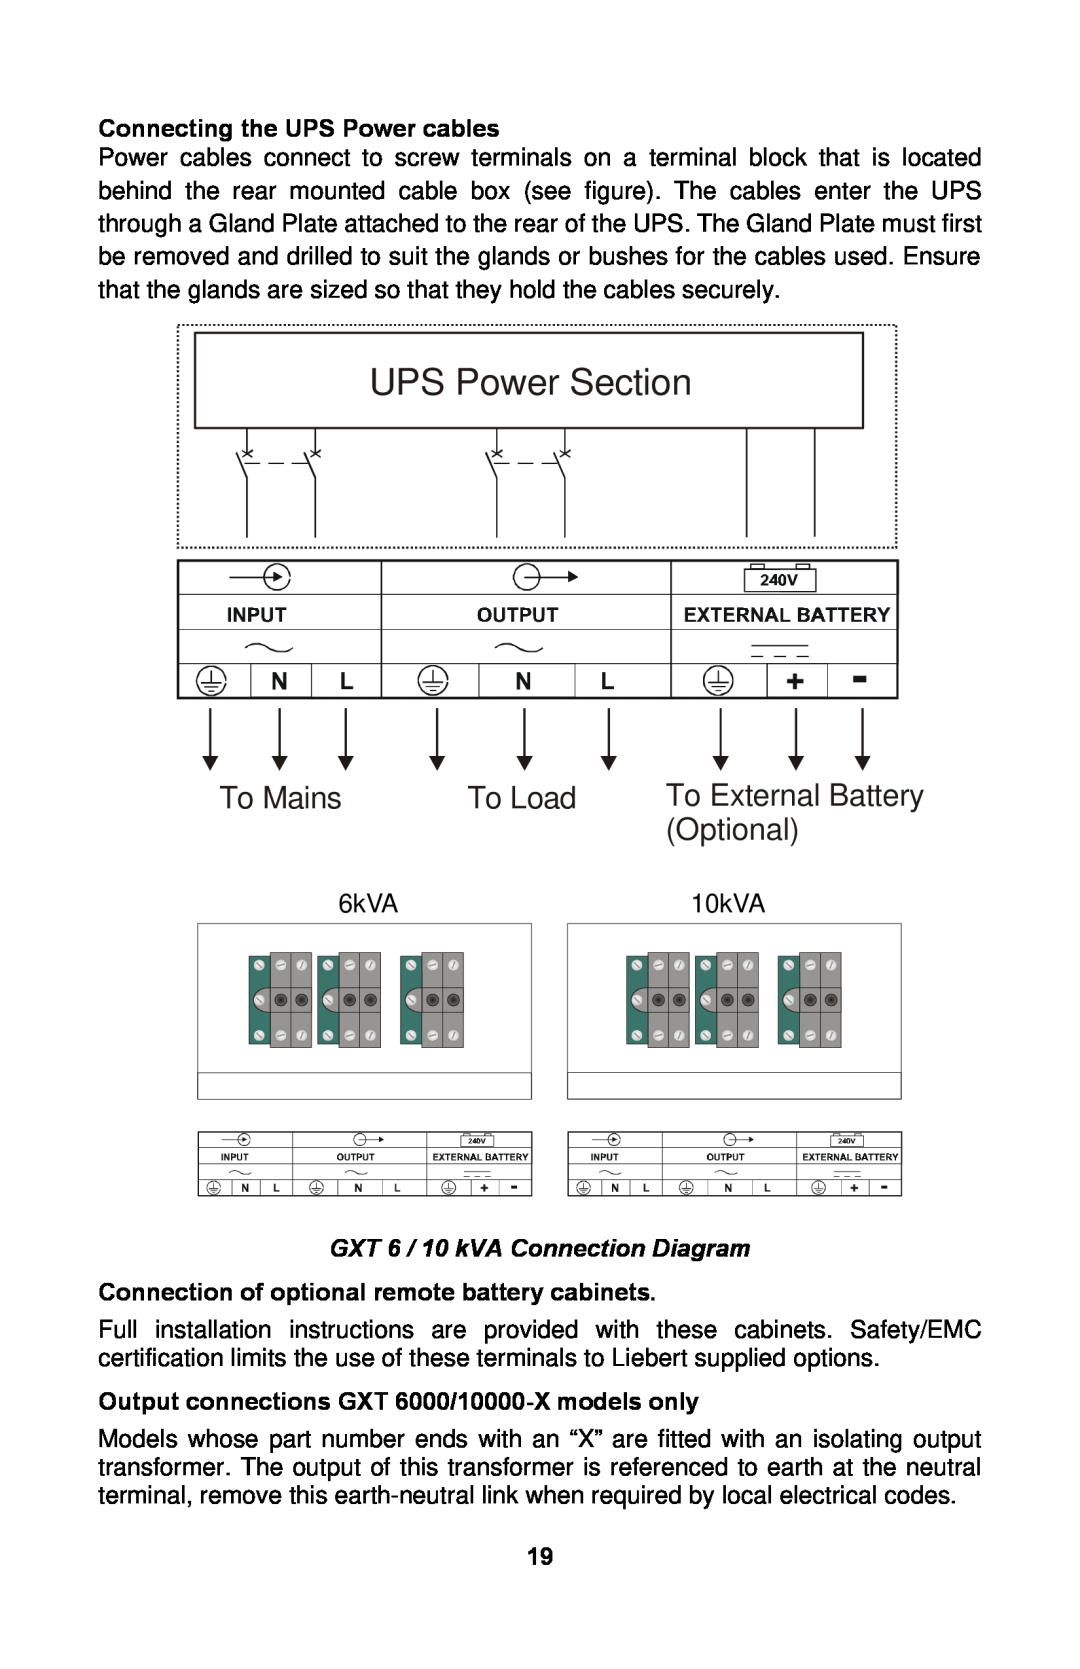 Liebert GXTTM UPS Power Section, To Mains, To Load, To External Battery, Optional, Connecting the UPS Power cables 